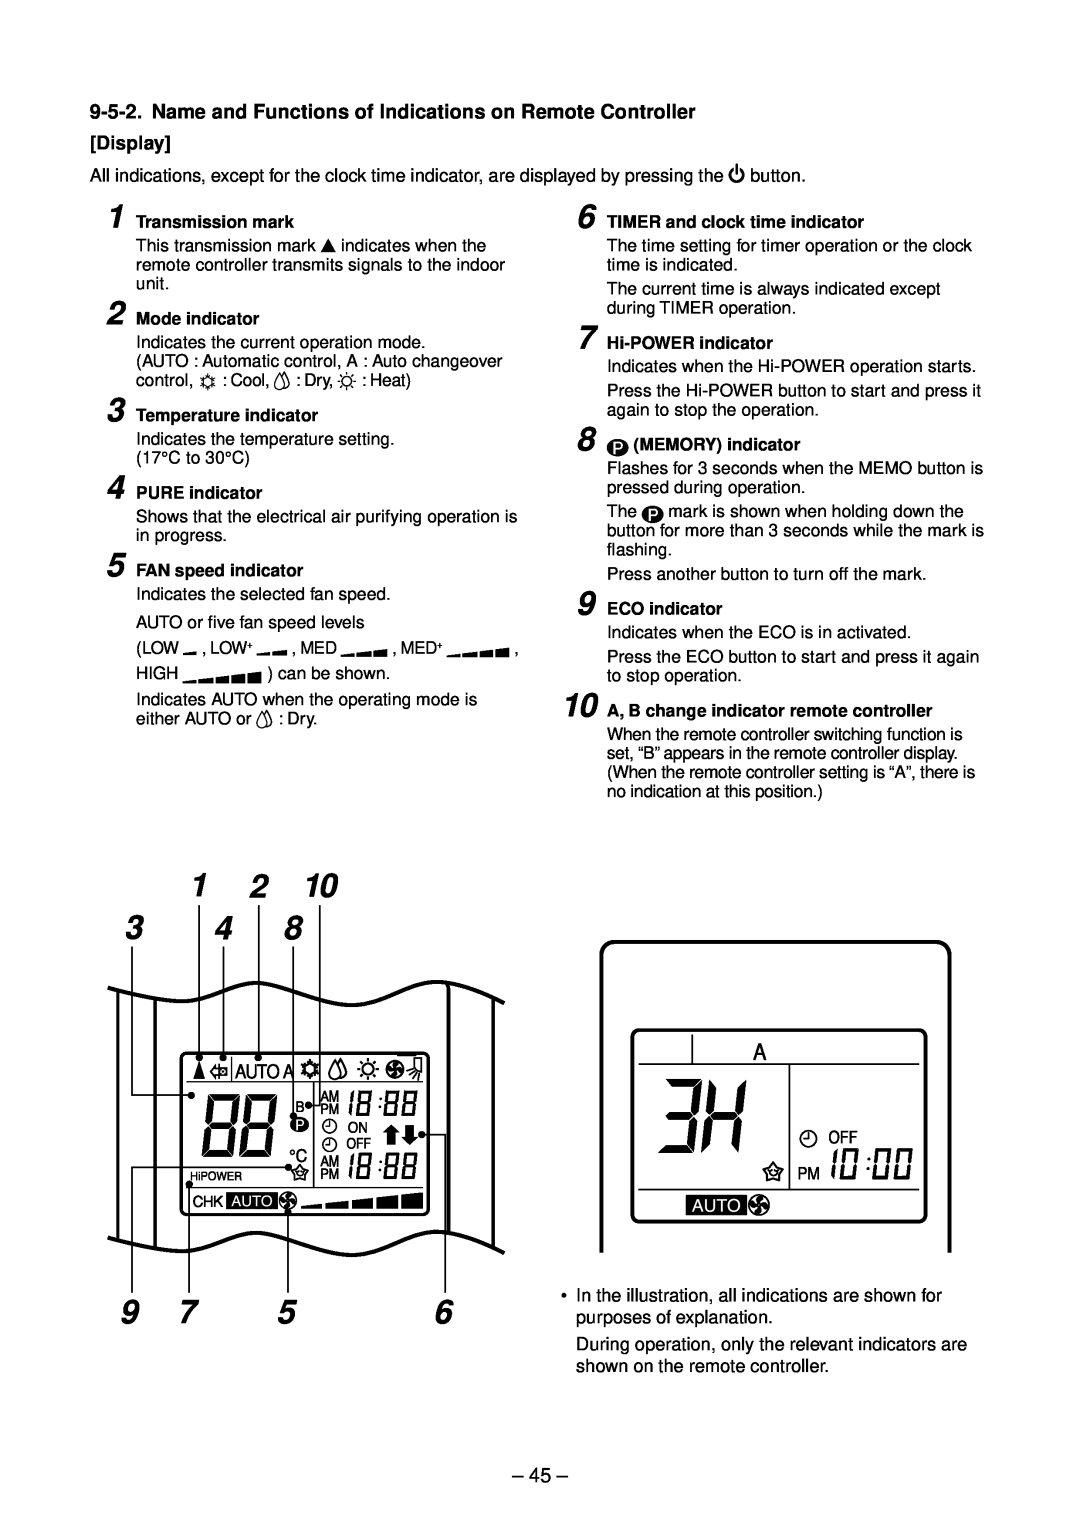 Toshiba RAS-13GAVP-E Name and Functions of Indications on Remote Controller, Display, purposes of explanation 